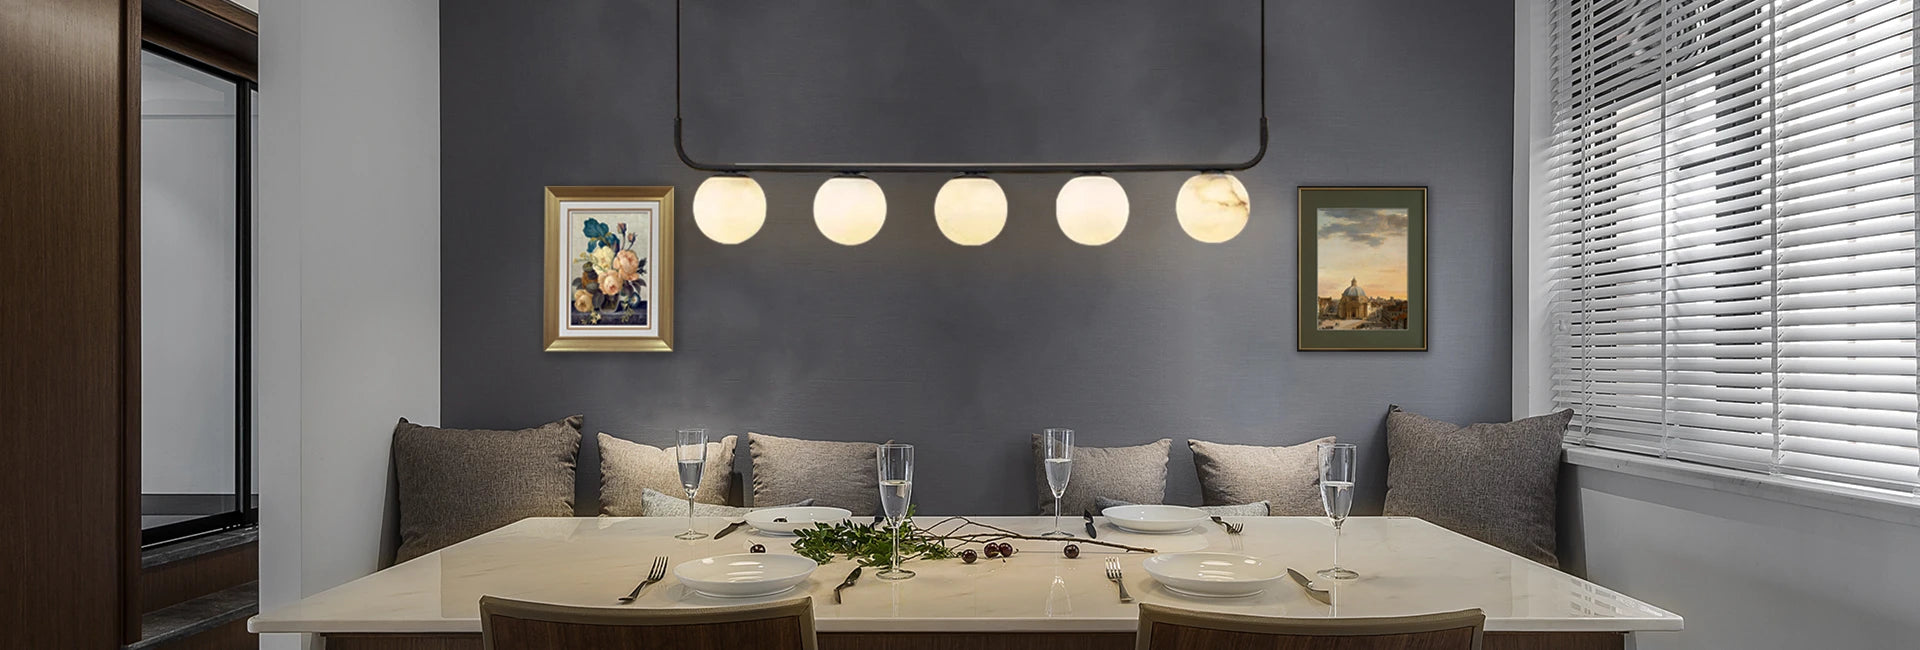 Modern Living Space with Fabtiko® Pendant Lights